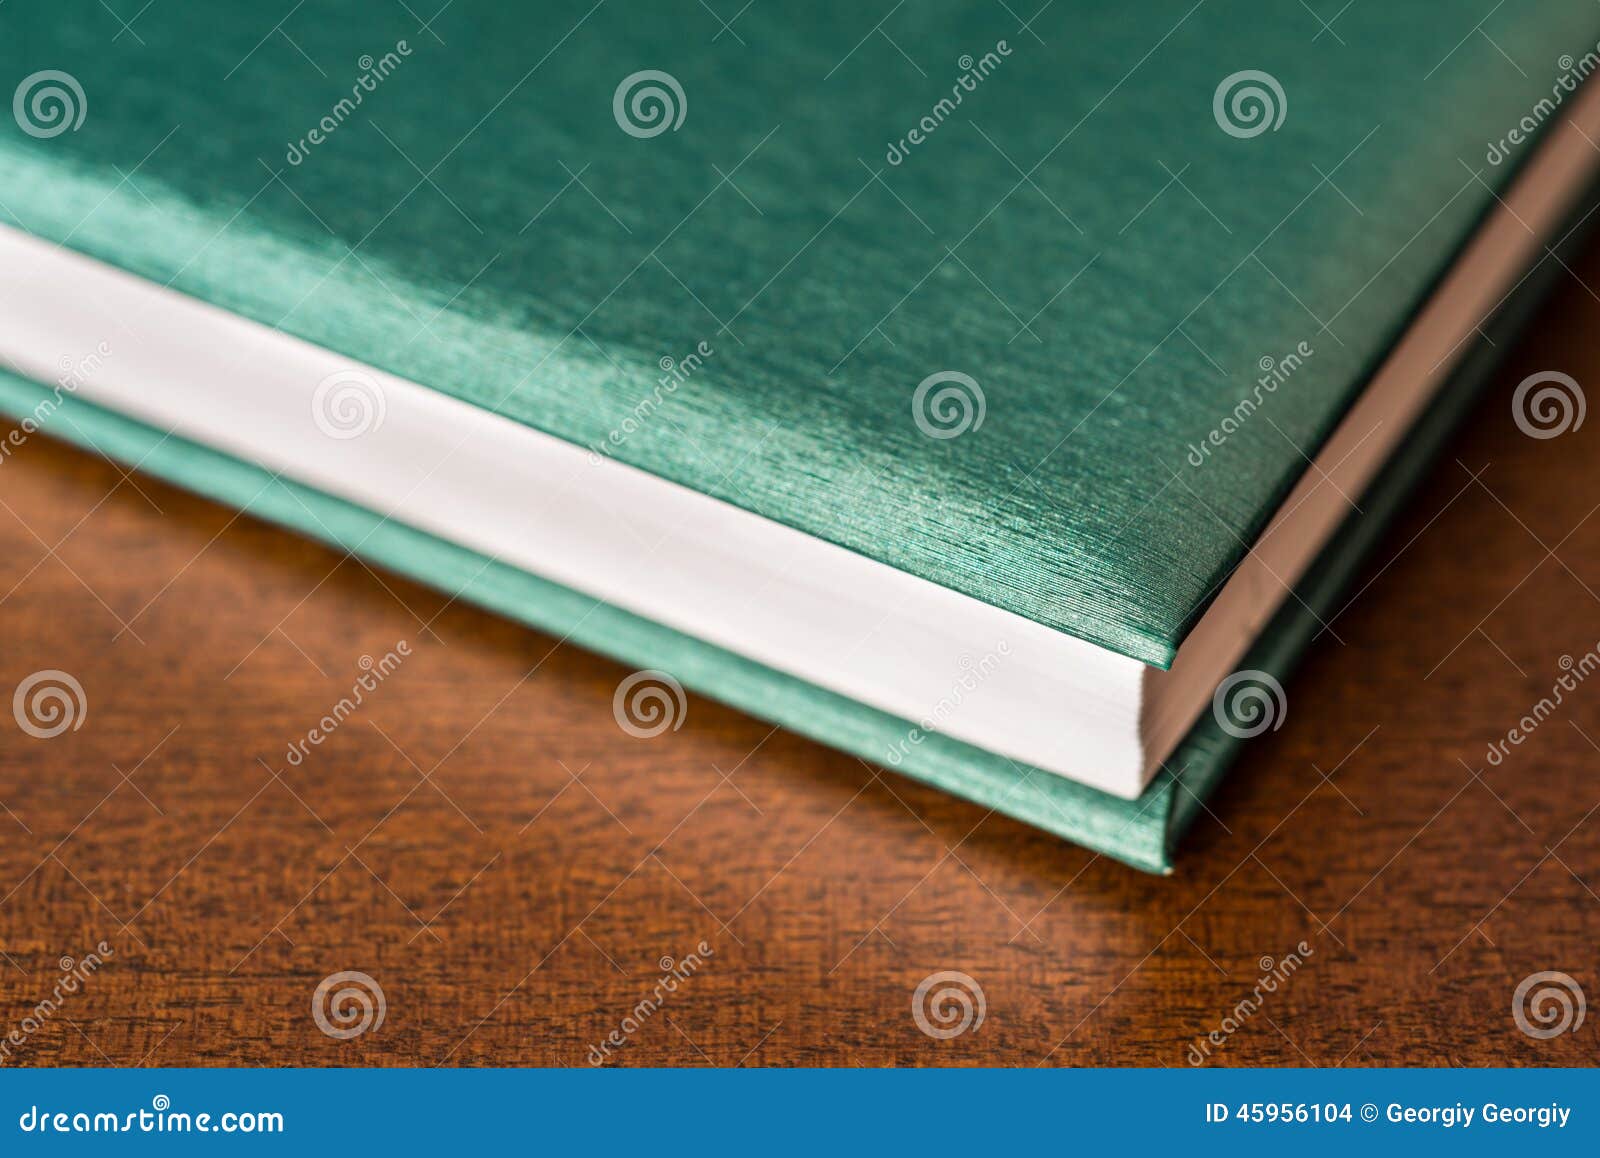 Book on the table stock photo. Image of imagination, paper - 45956104